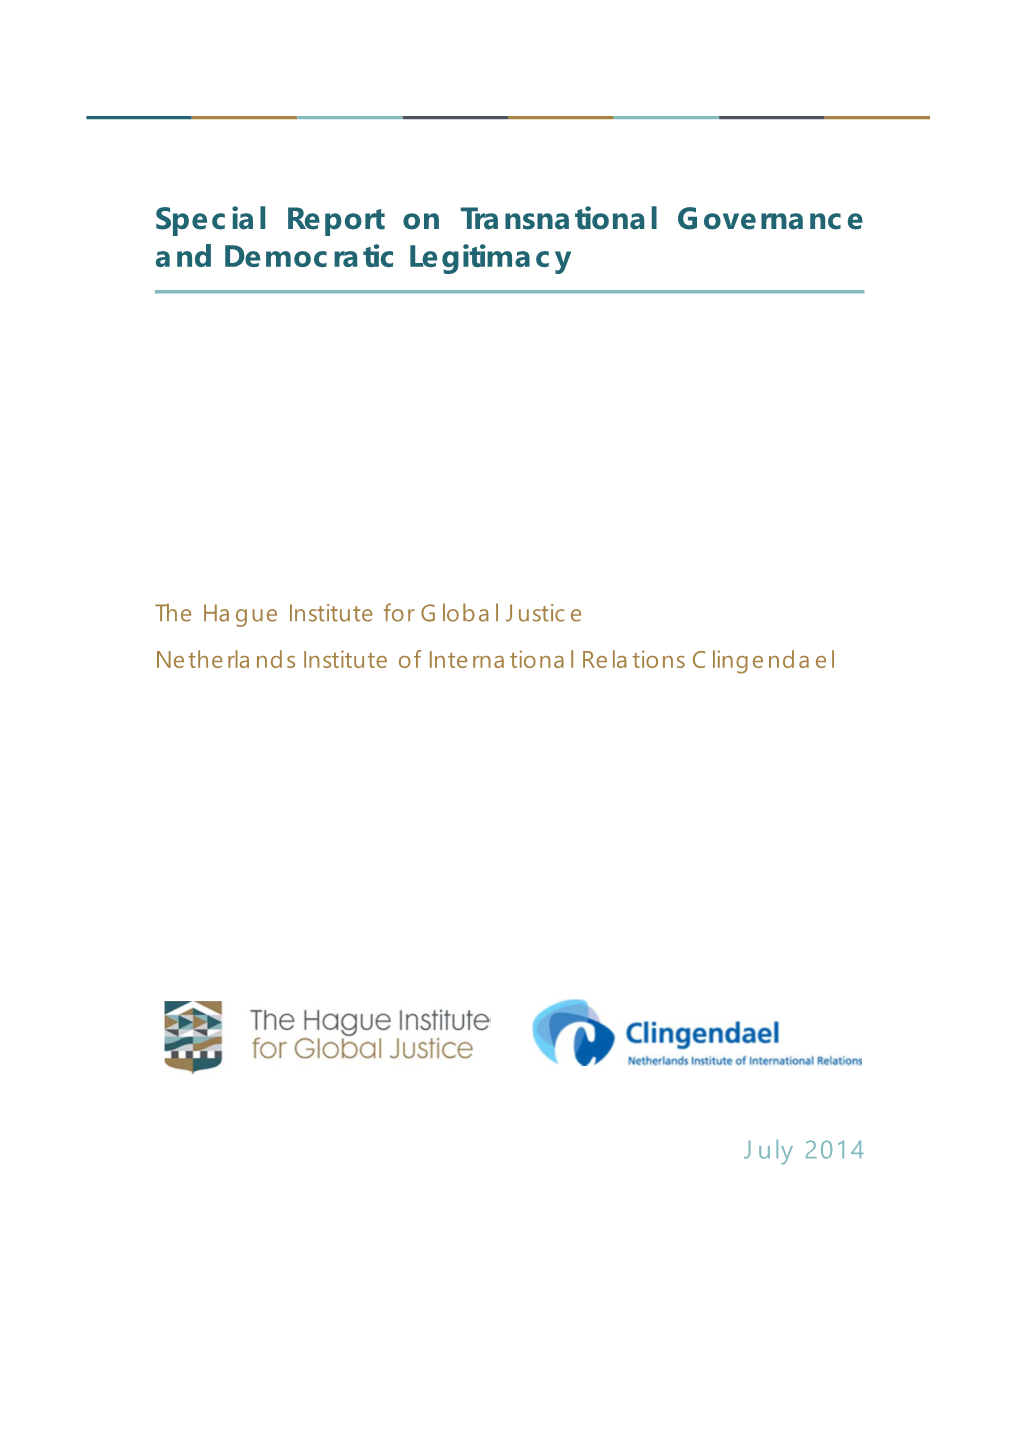 Special Report on Transnational Governance and Democratic Legitimacy